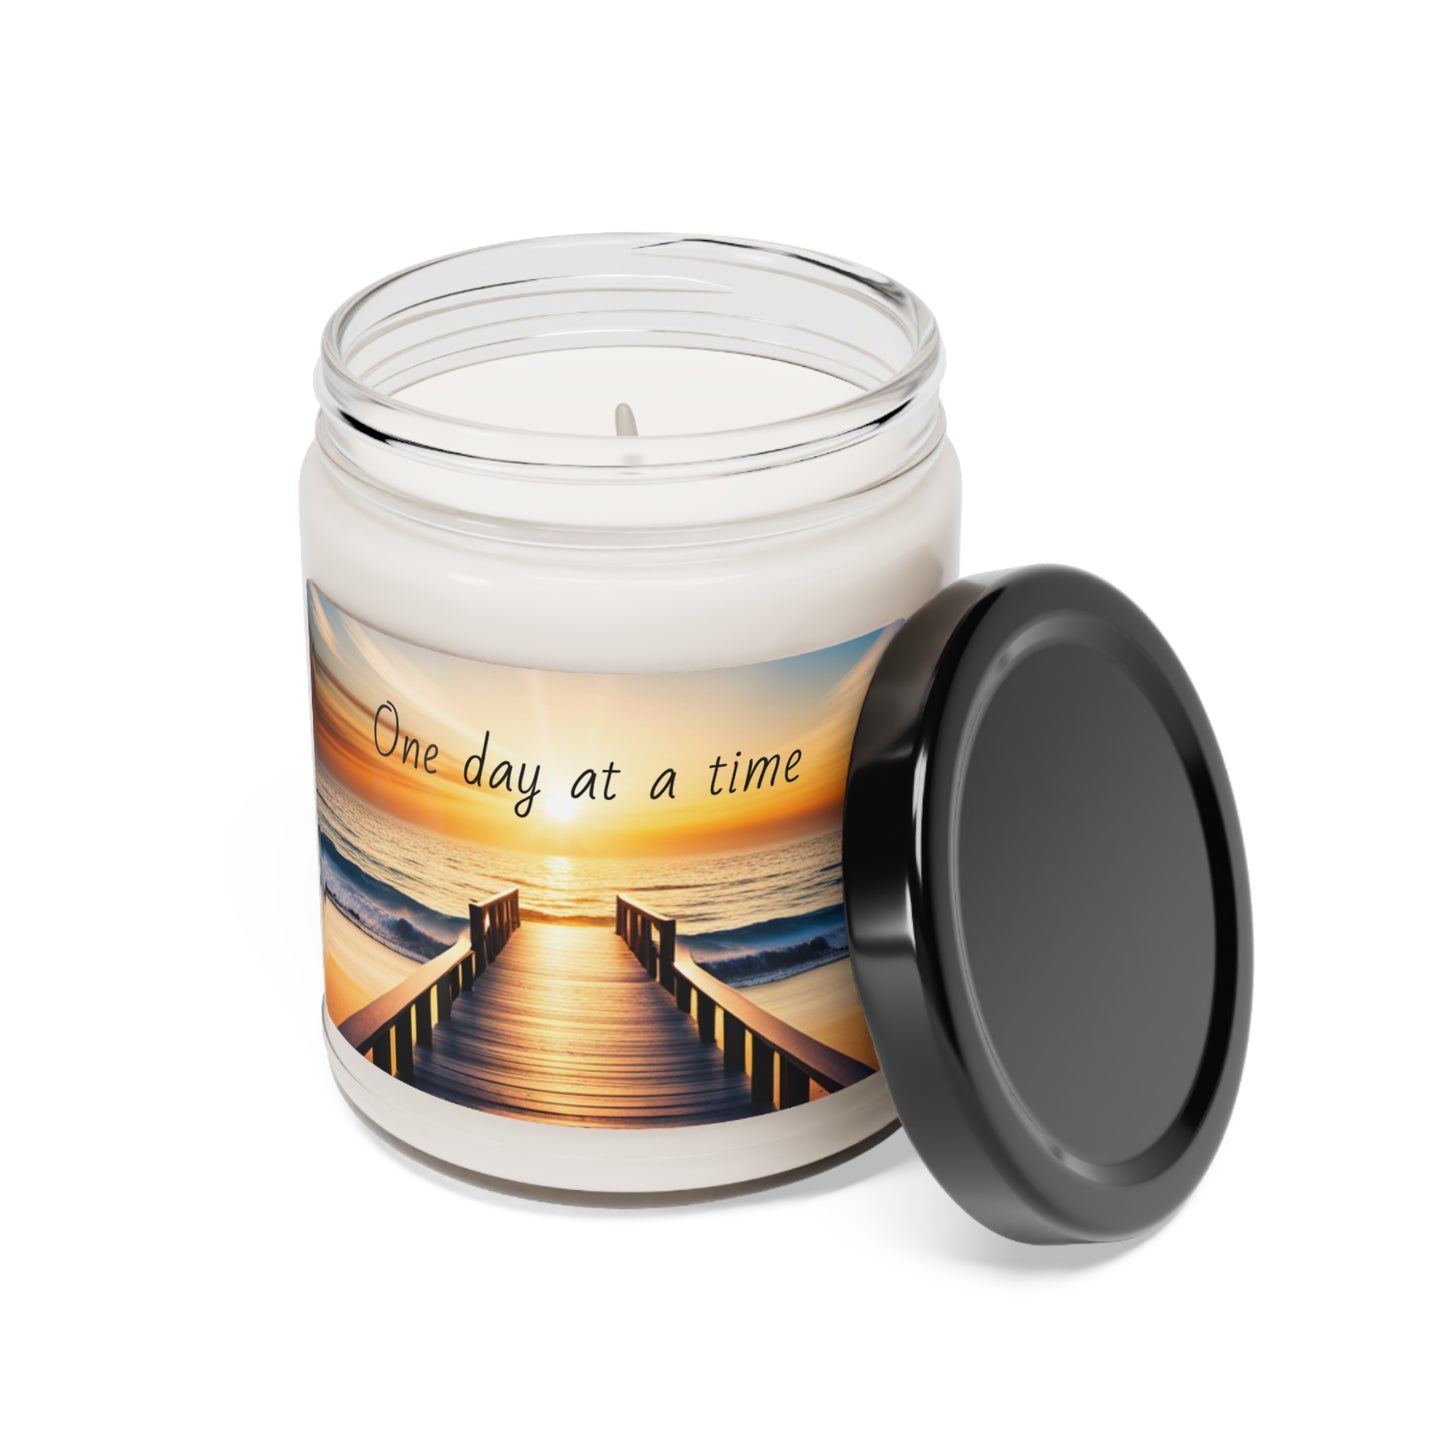 One Day at a time Scented Soy Candle, 9oz